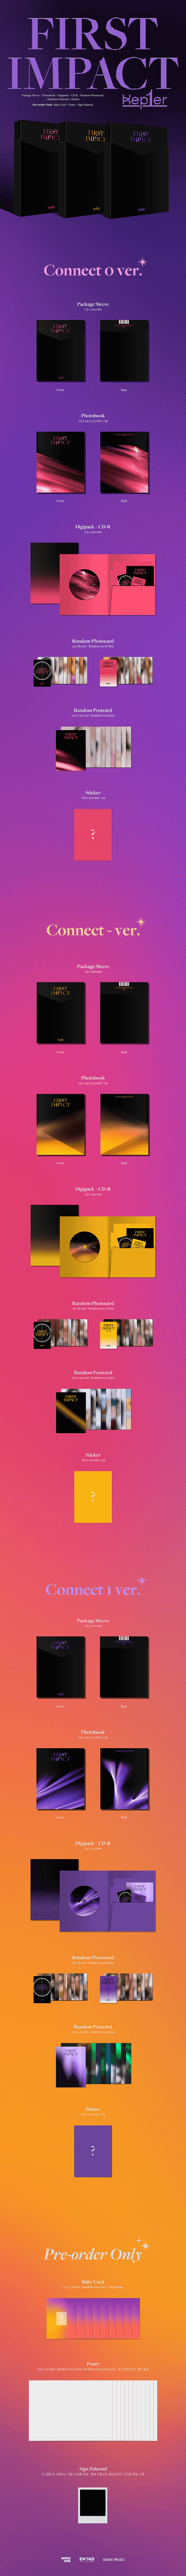 PREORDER  KEP1ER - 1ST MINI ALBUM FIRST IMPACT Infographic